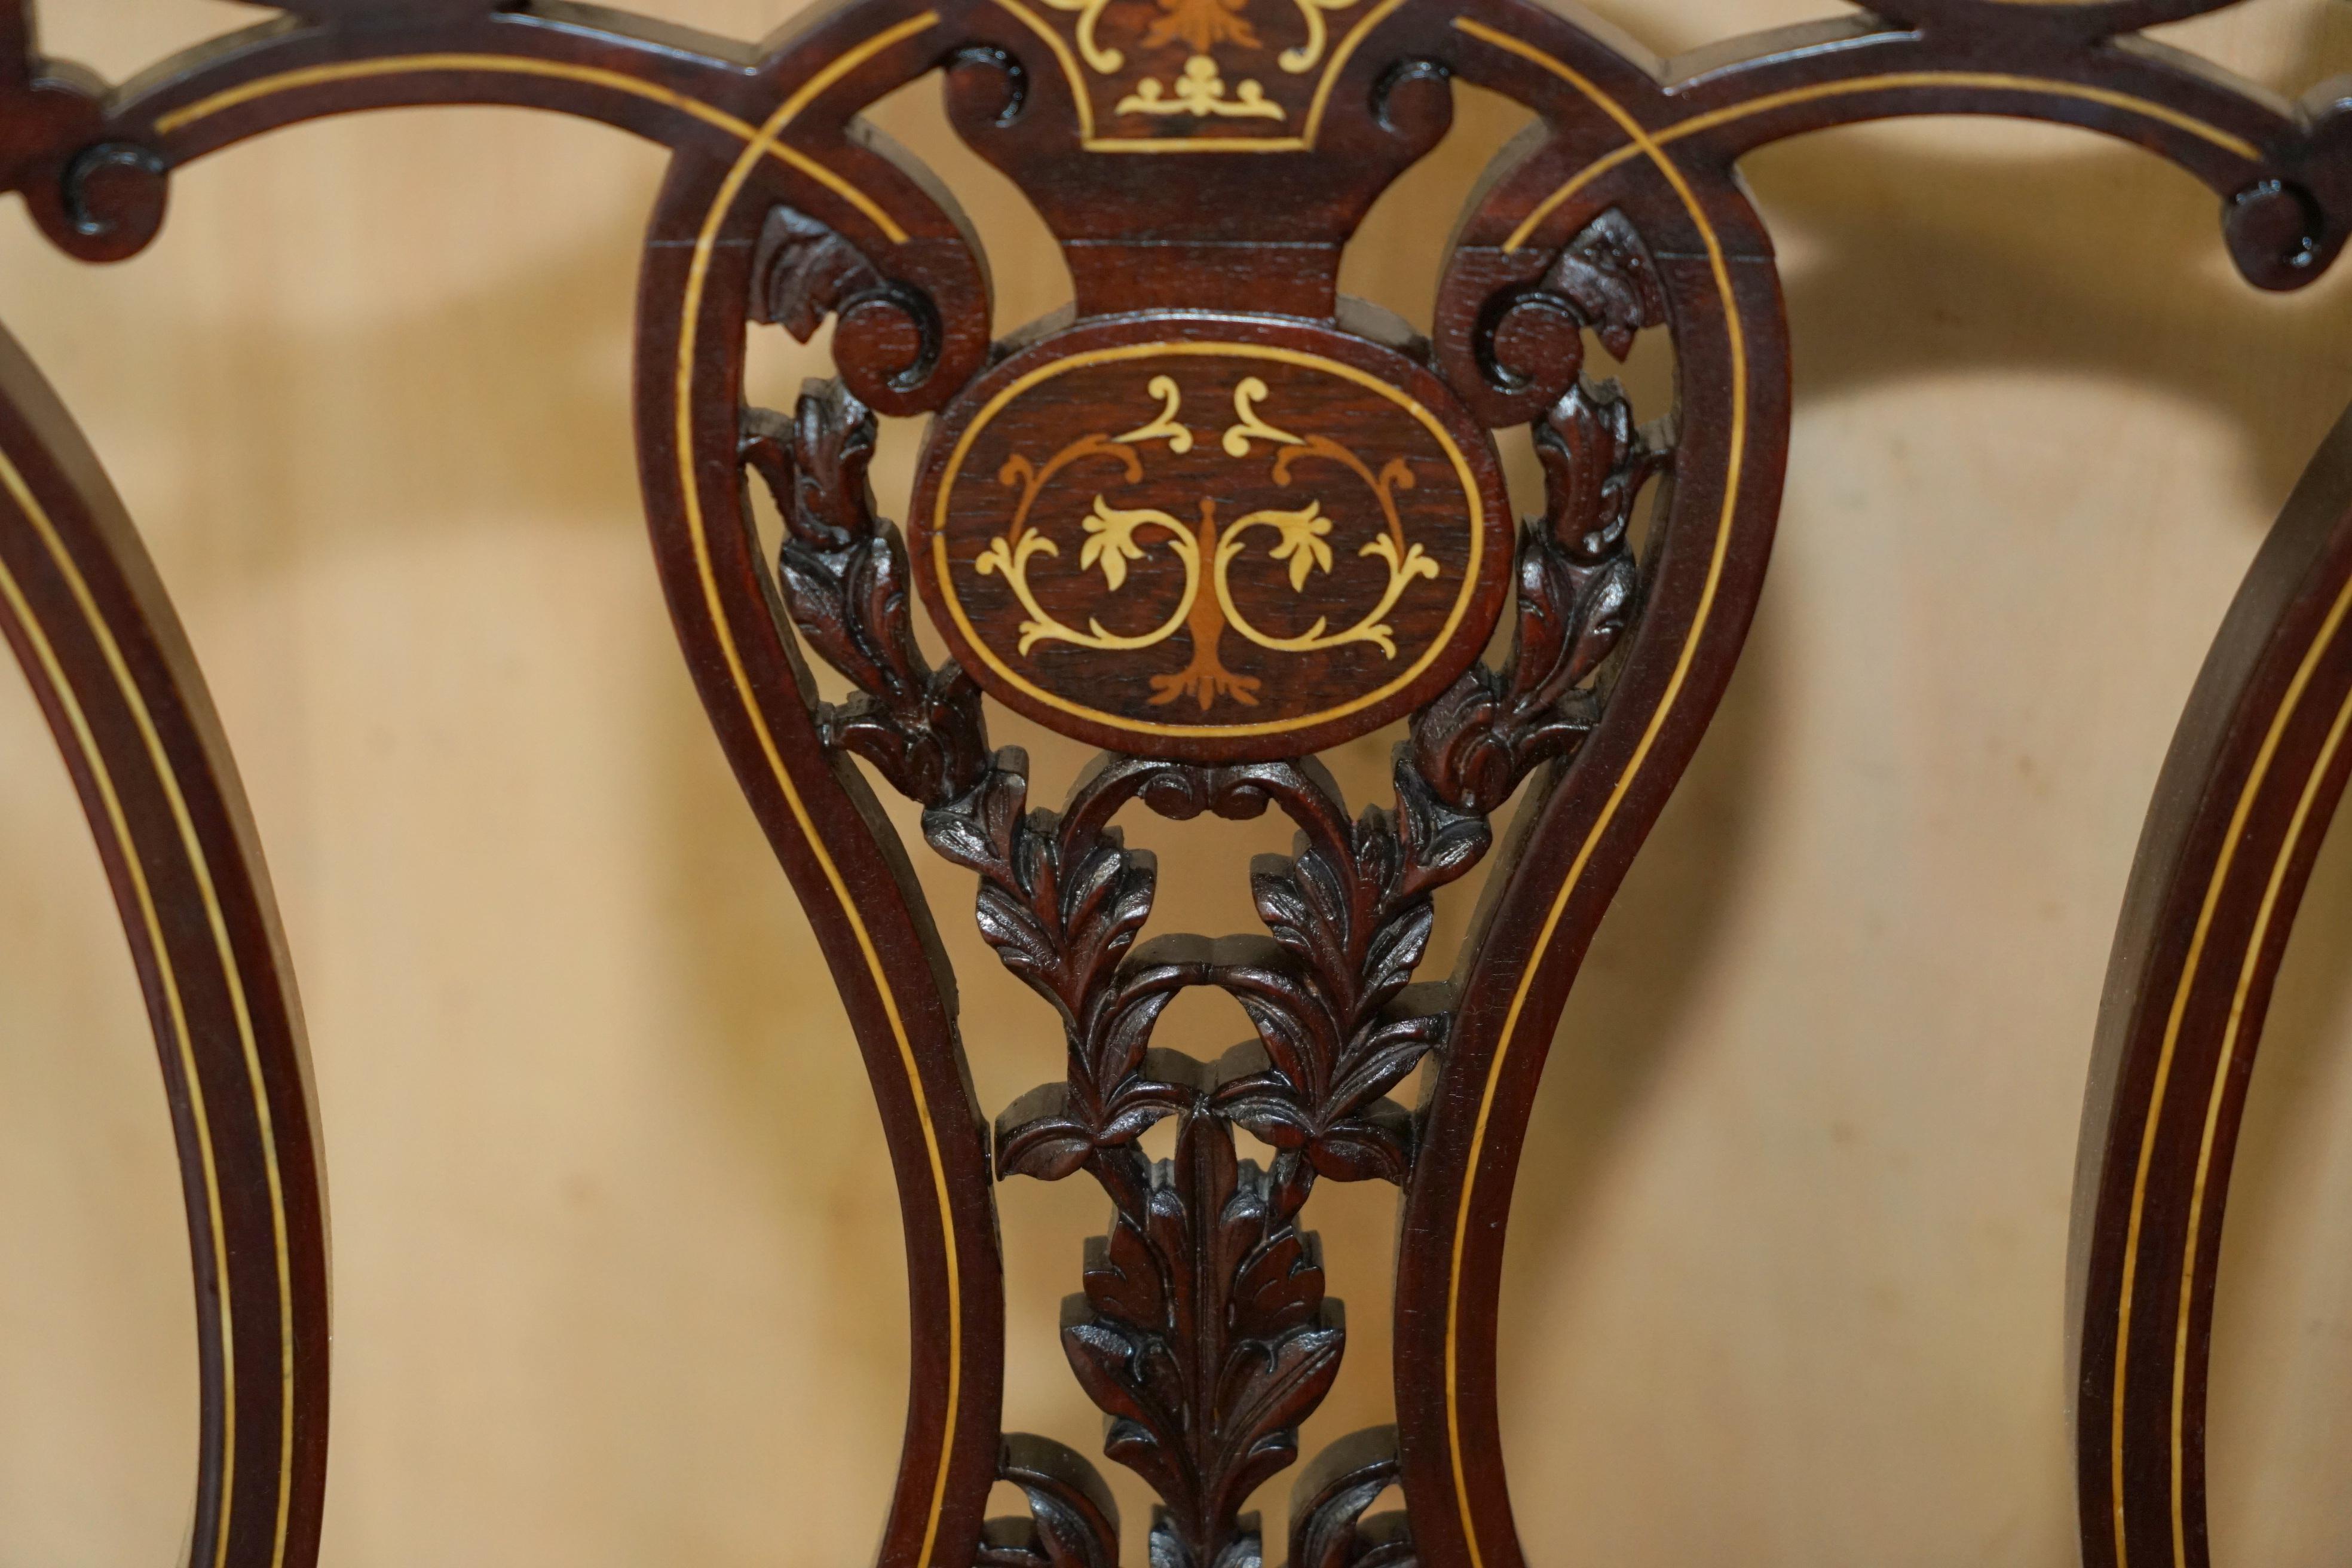 PAiR OF ANTIQUE VICTORIAN HARDWOOD SALON CHAIRS WITH STUNNING INLAID BACK PANELS For Sale 12